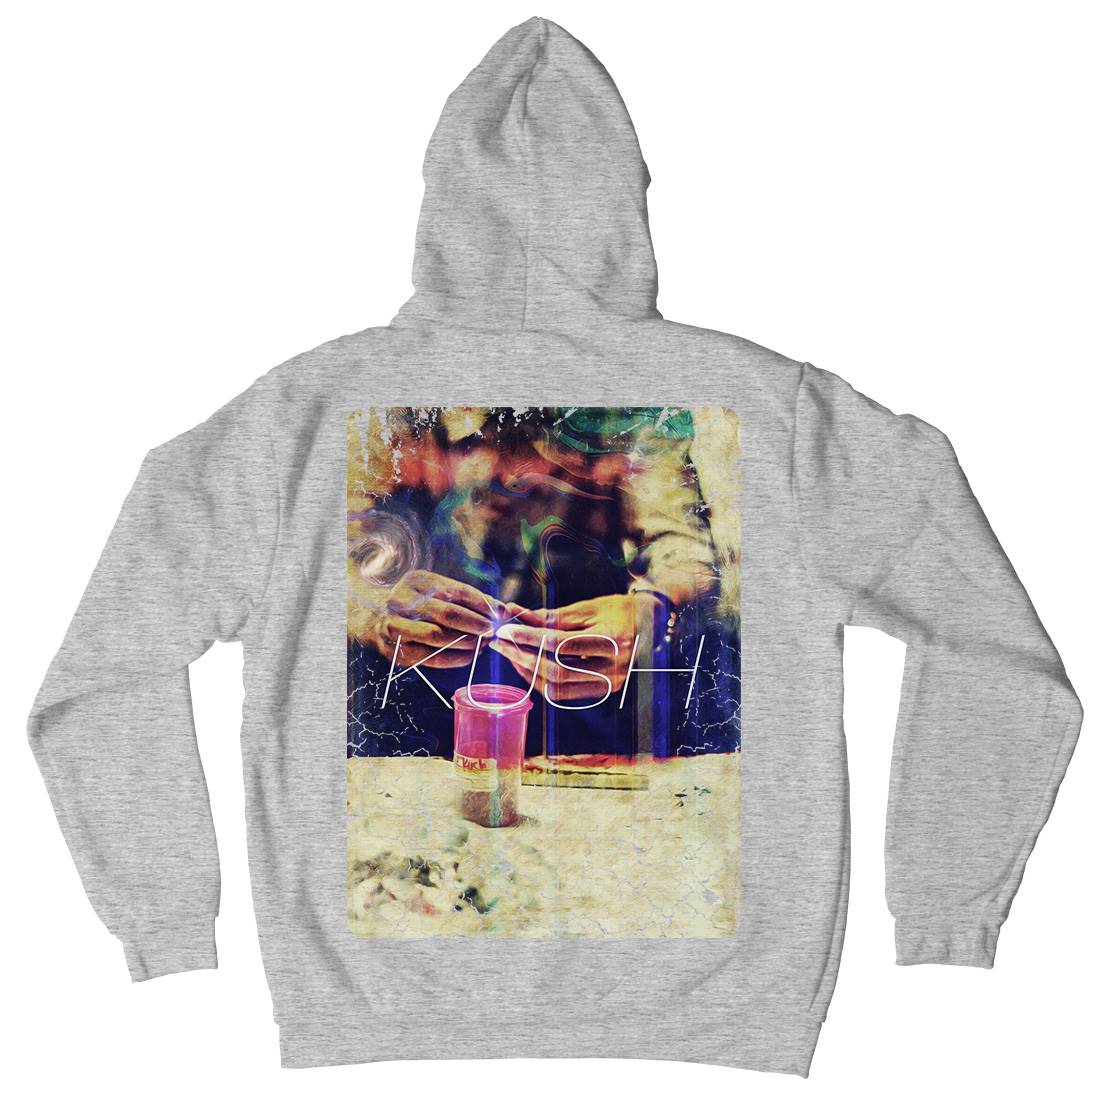 Kush Trippin Mens Hoodie With Pocket Drugs A857